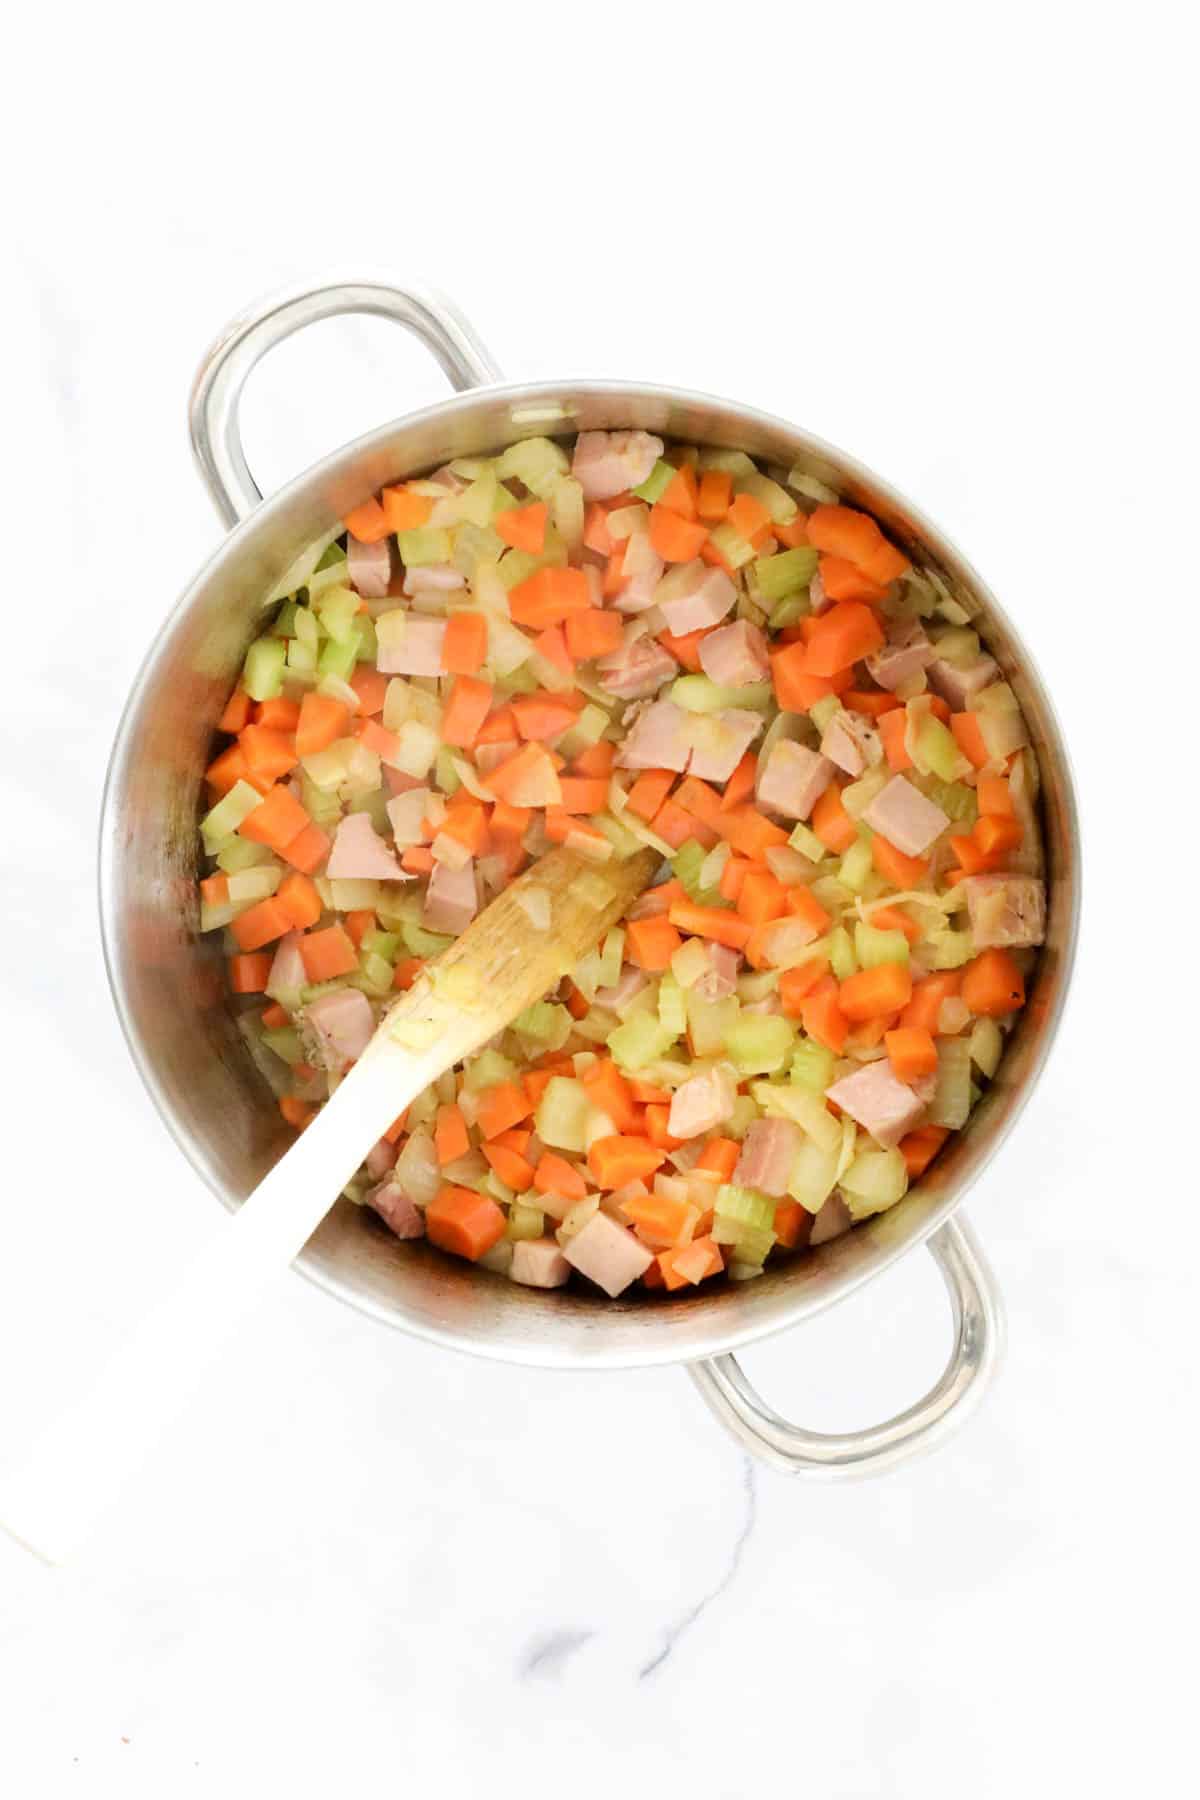 The onion, celery, carrot and pancetta in a saucepan.